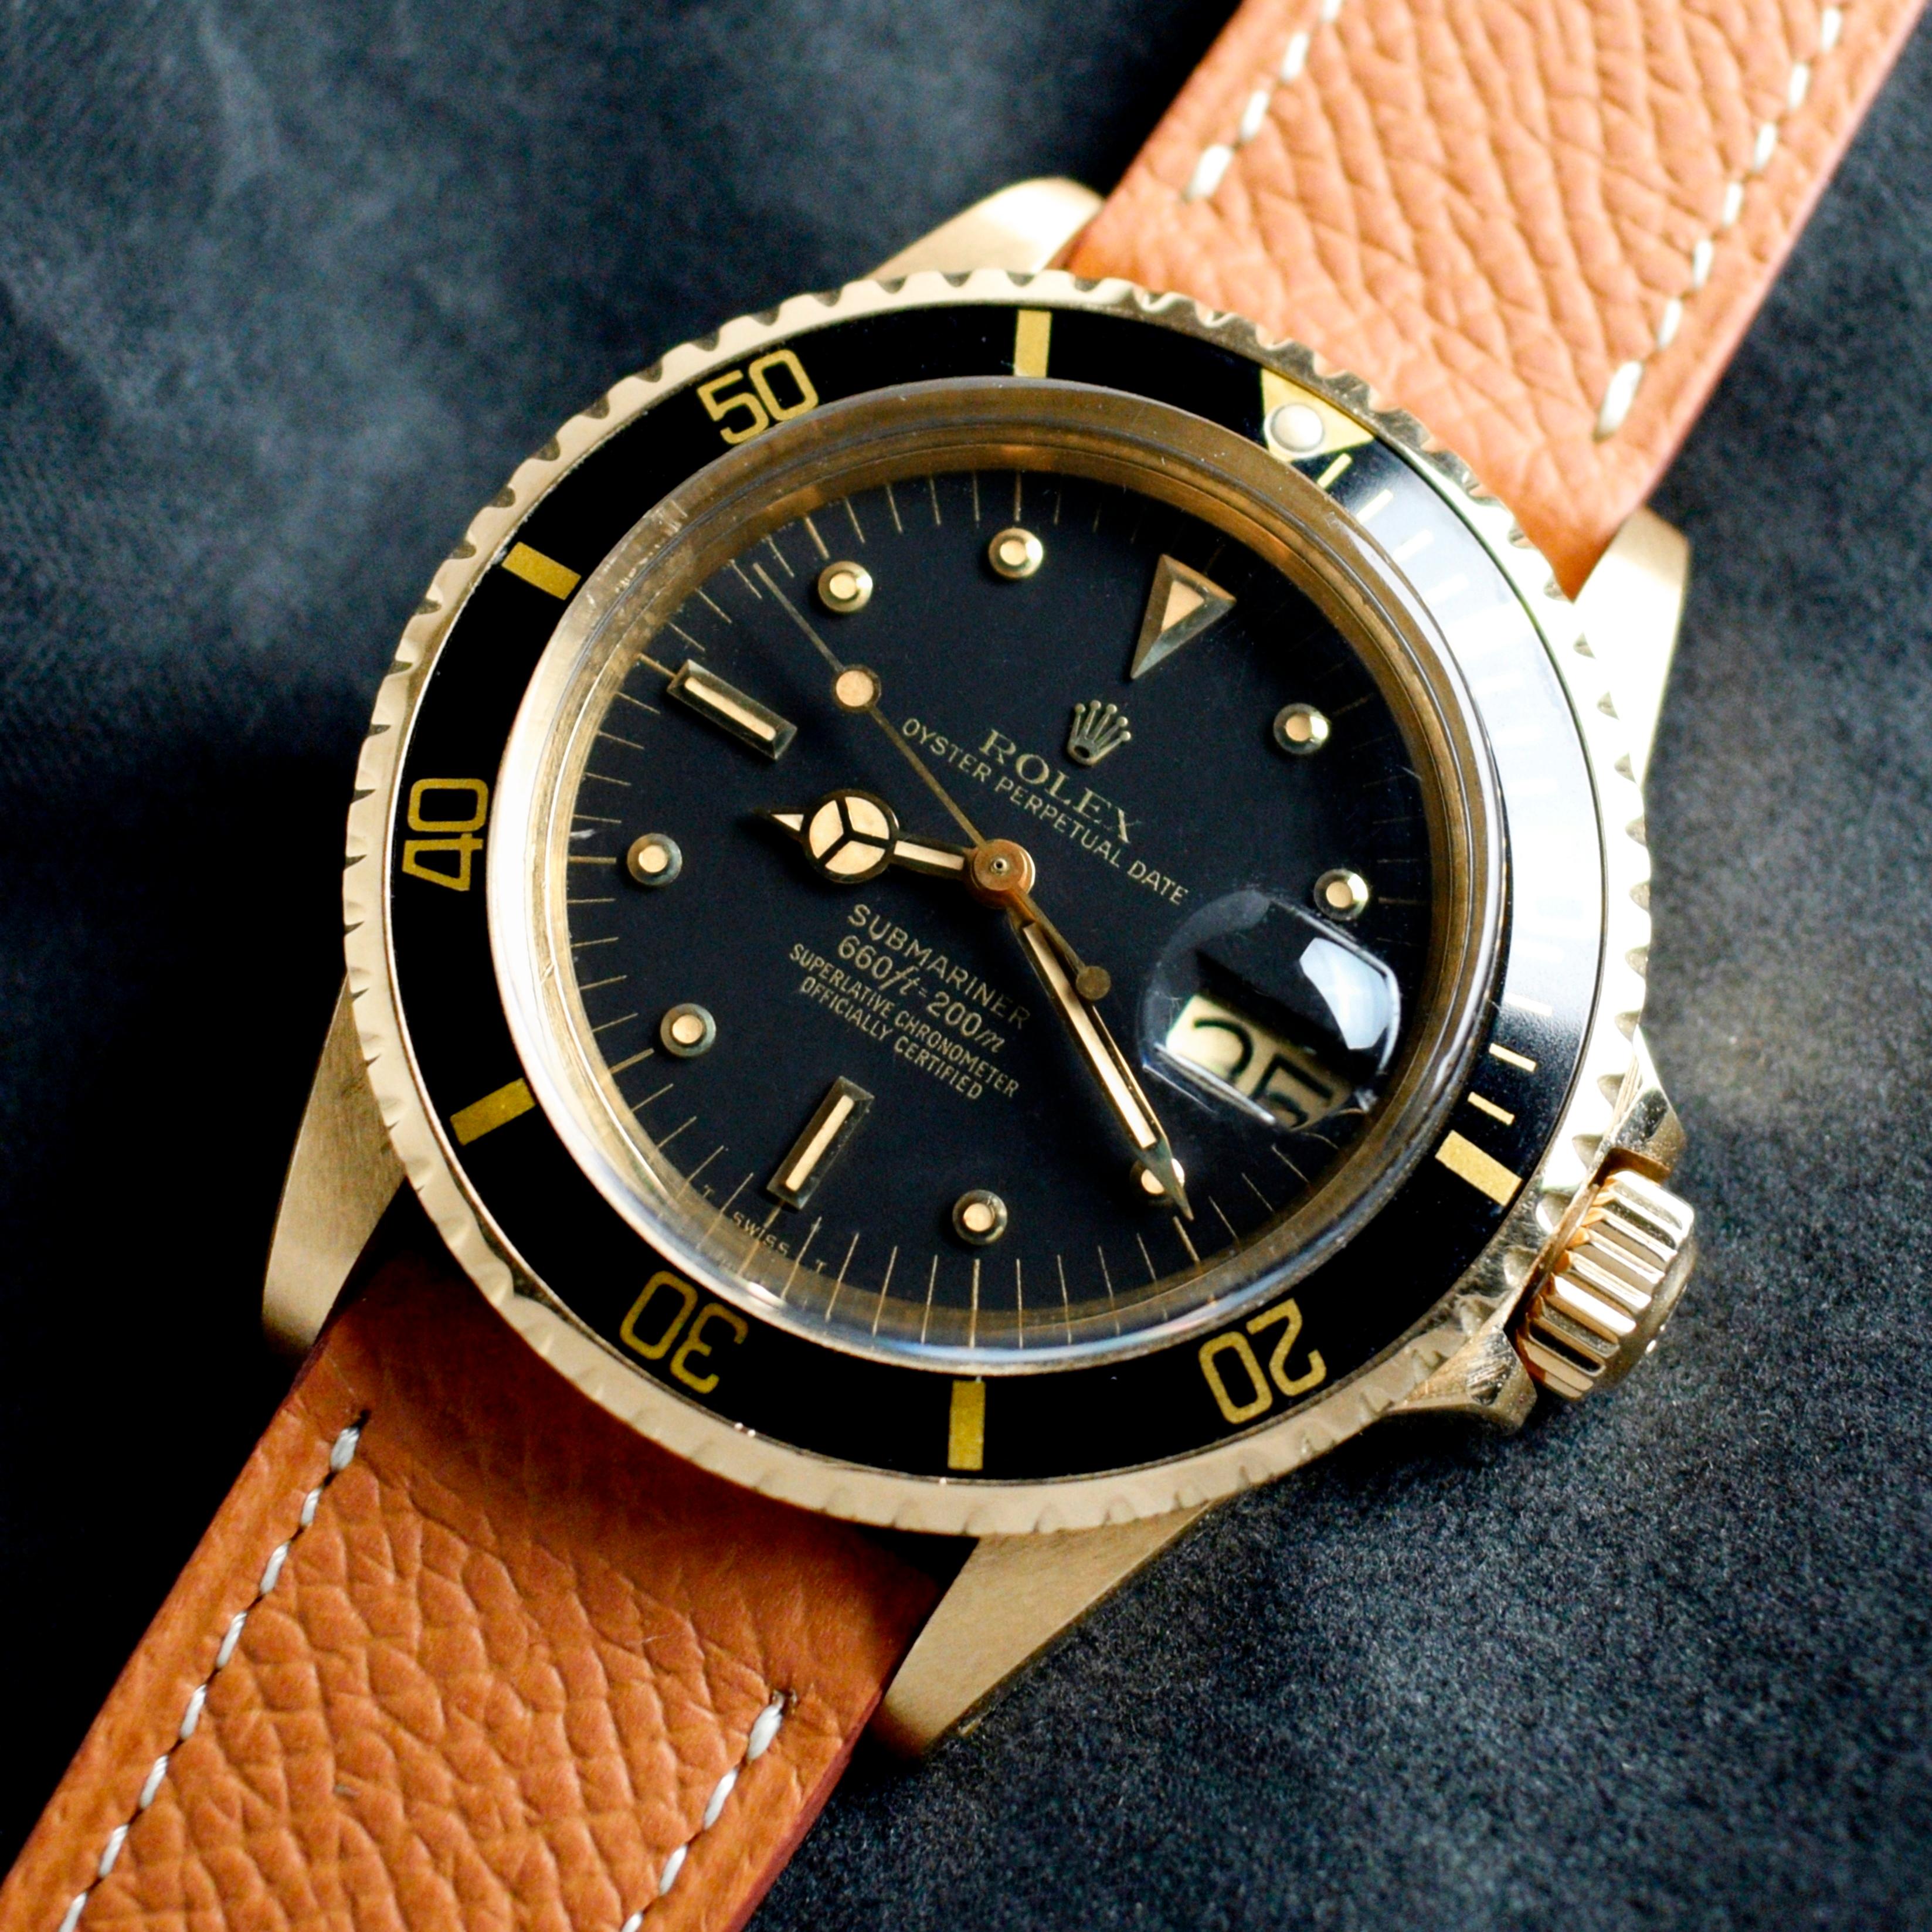 Brand: Vintage Rolex
Model: 1680
Year: 1978
Serial number: 57xxxxx
Reference: C03766

Case: Show sign of wear with slight polish from previous; inner case back stamped 1680

Dial: Excellent Aged Condition Tritium Dial where the lumes have turned